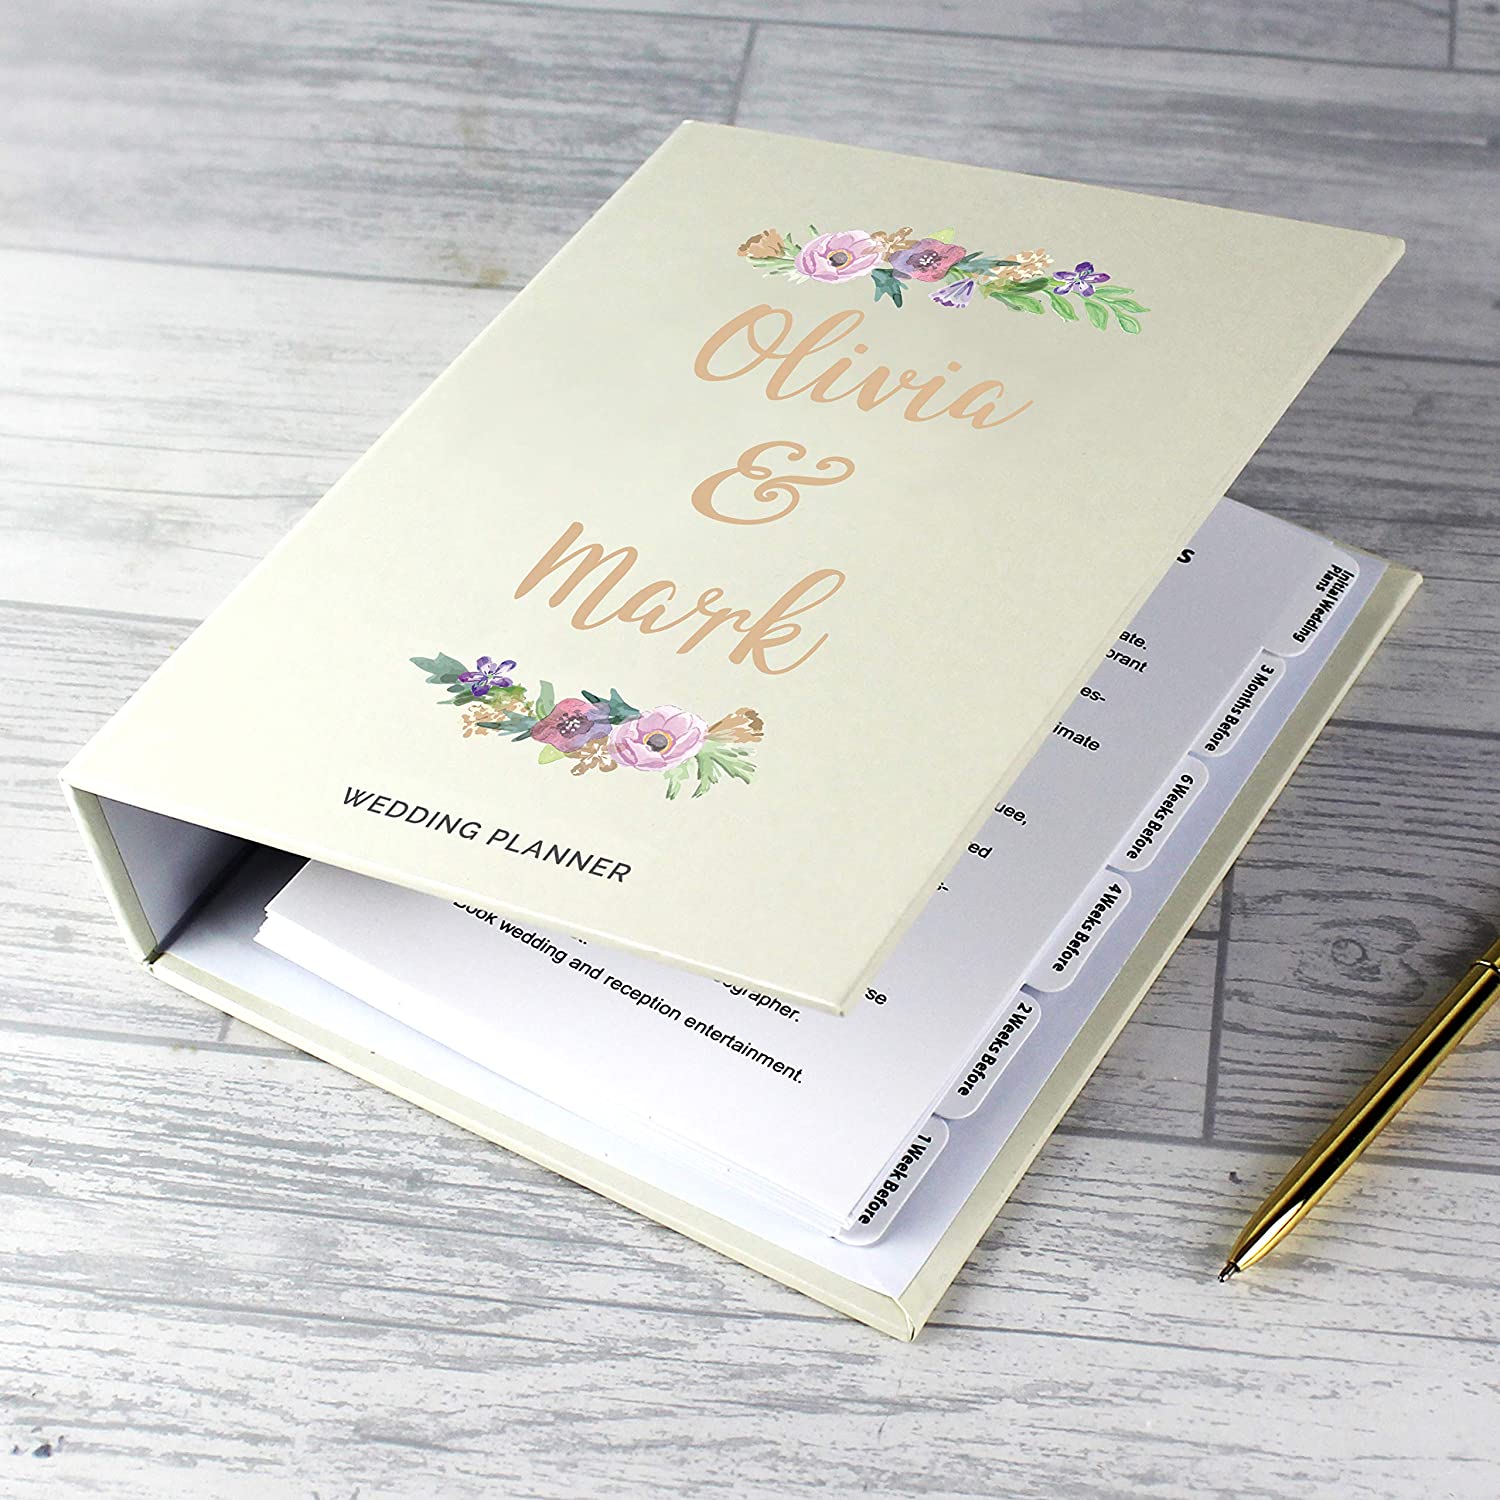 7 Wedding Planner Books For Organising Your Big Day